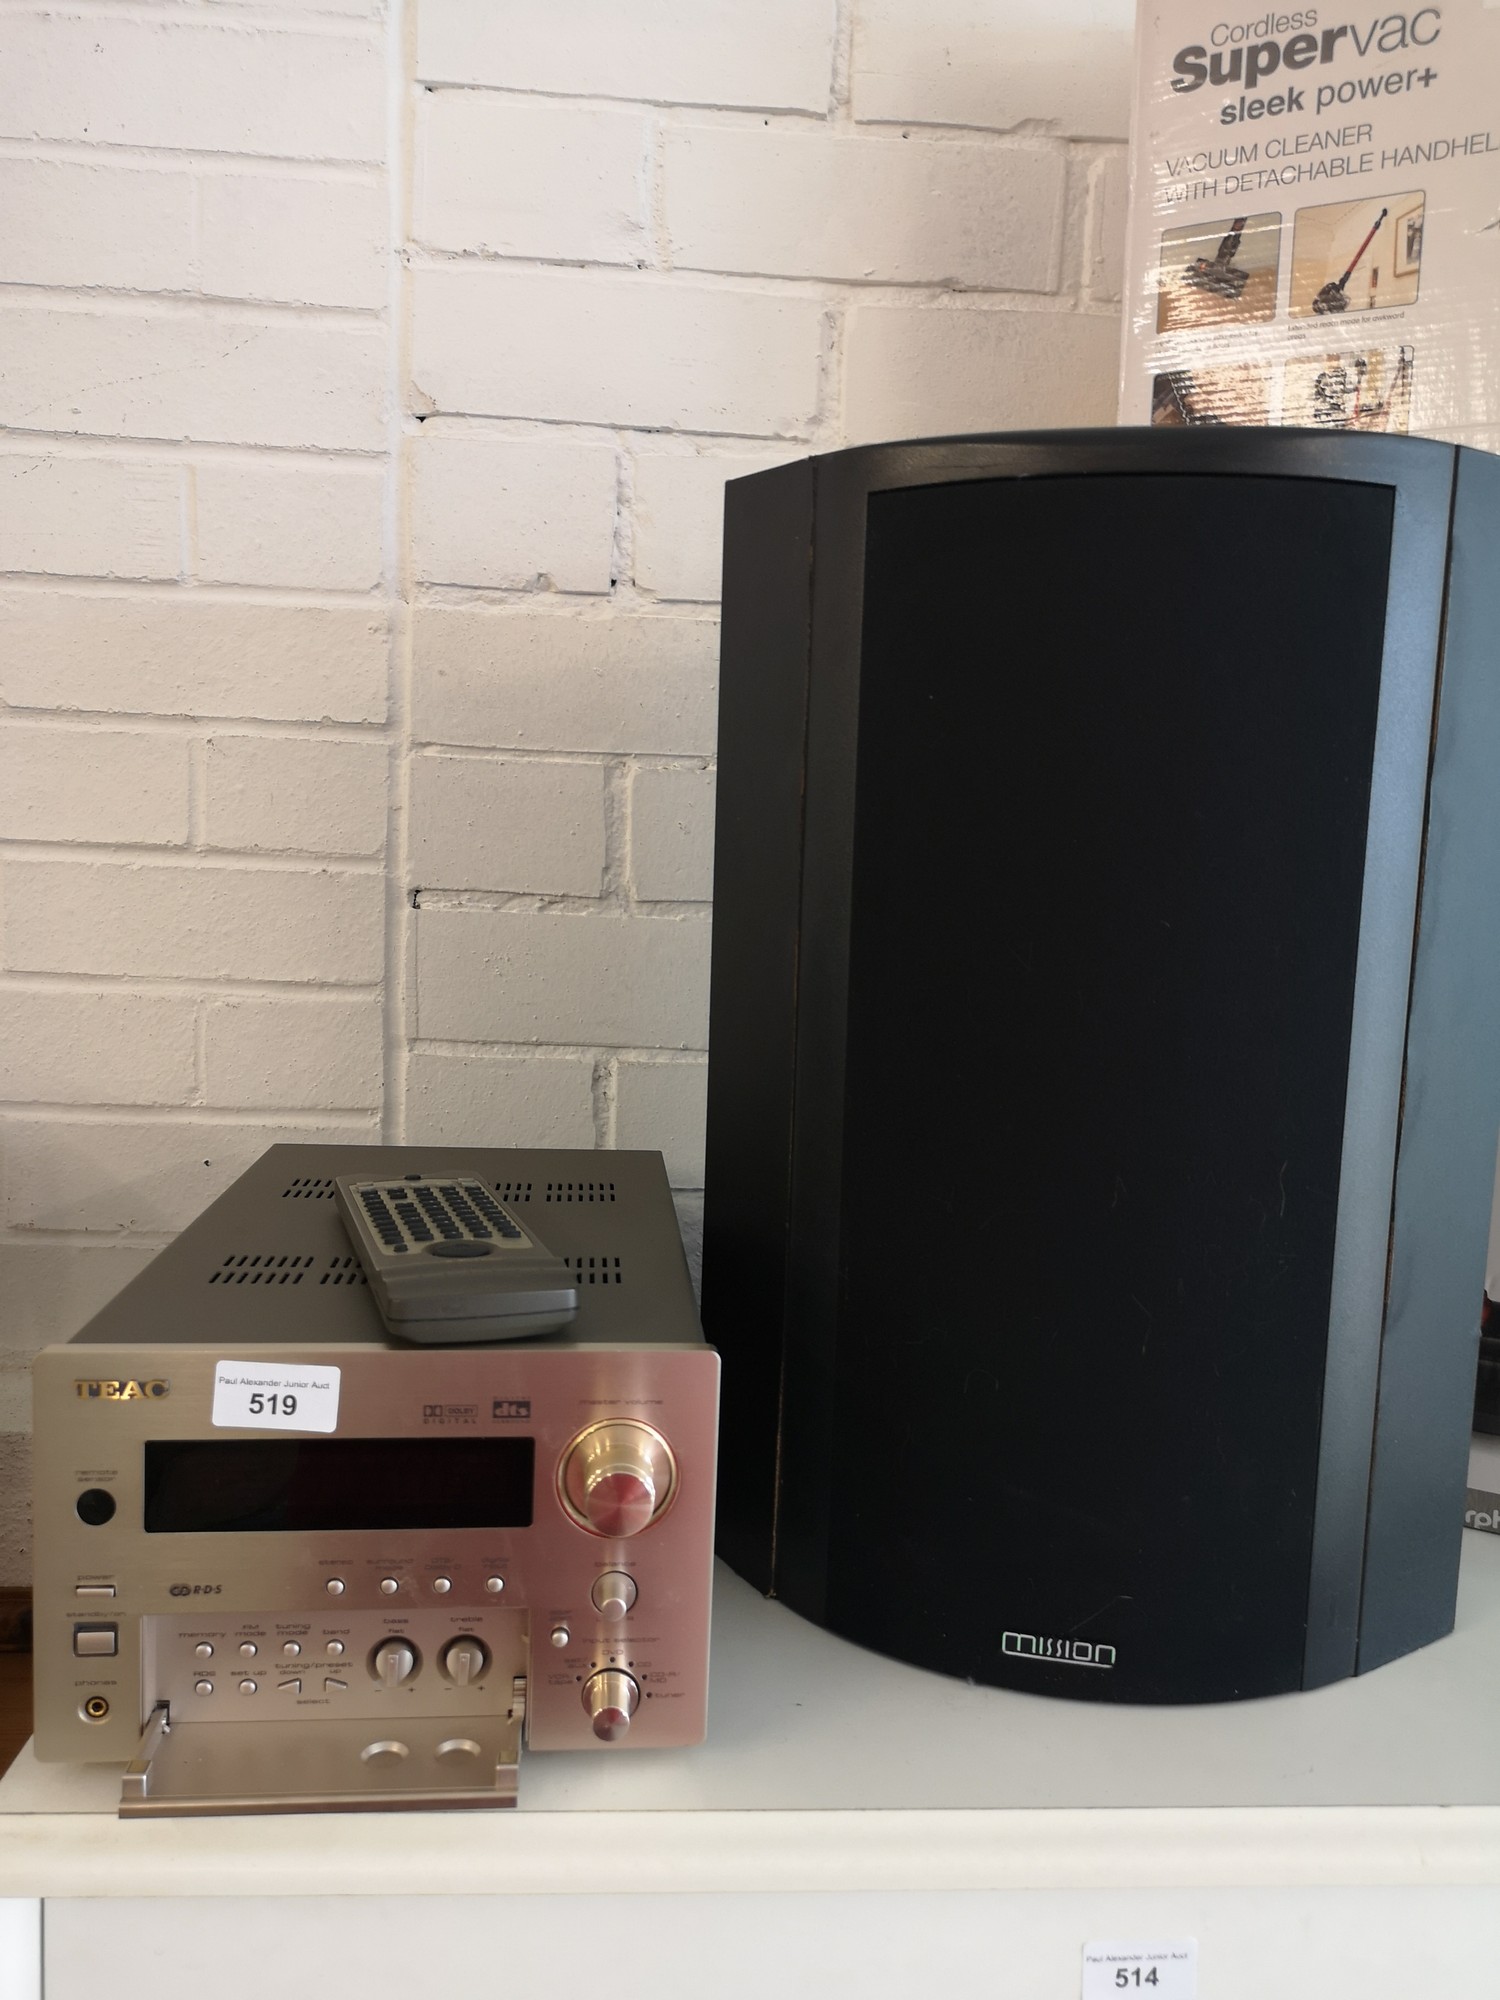 Teac hifi separate in working order together with mission top quality speaker.